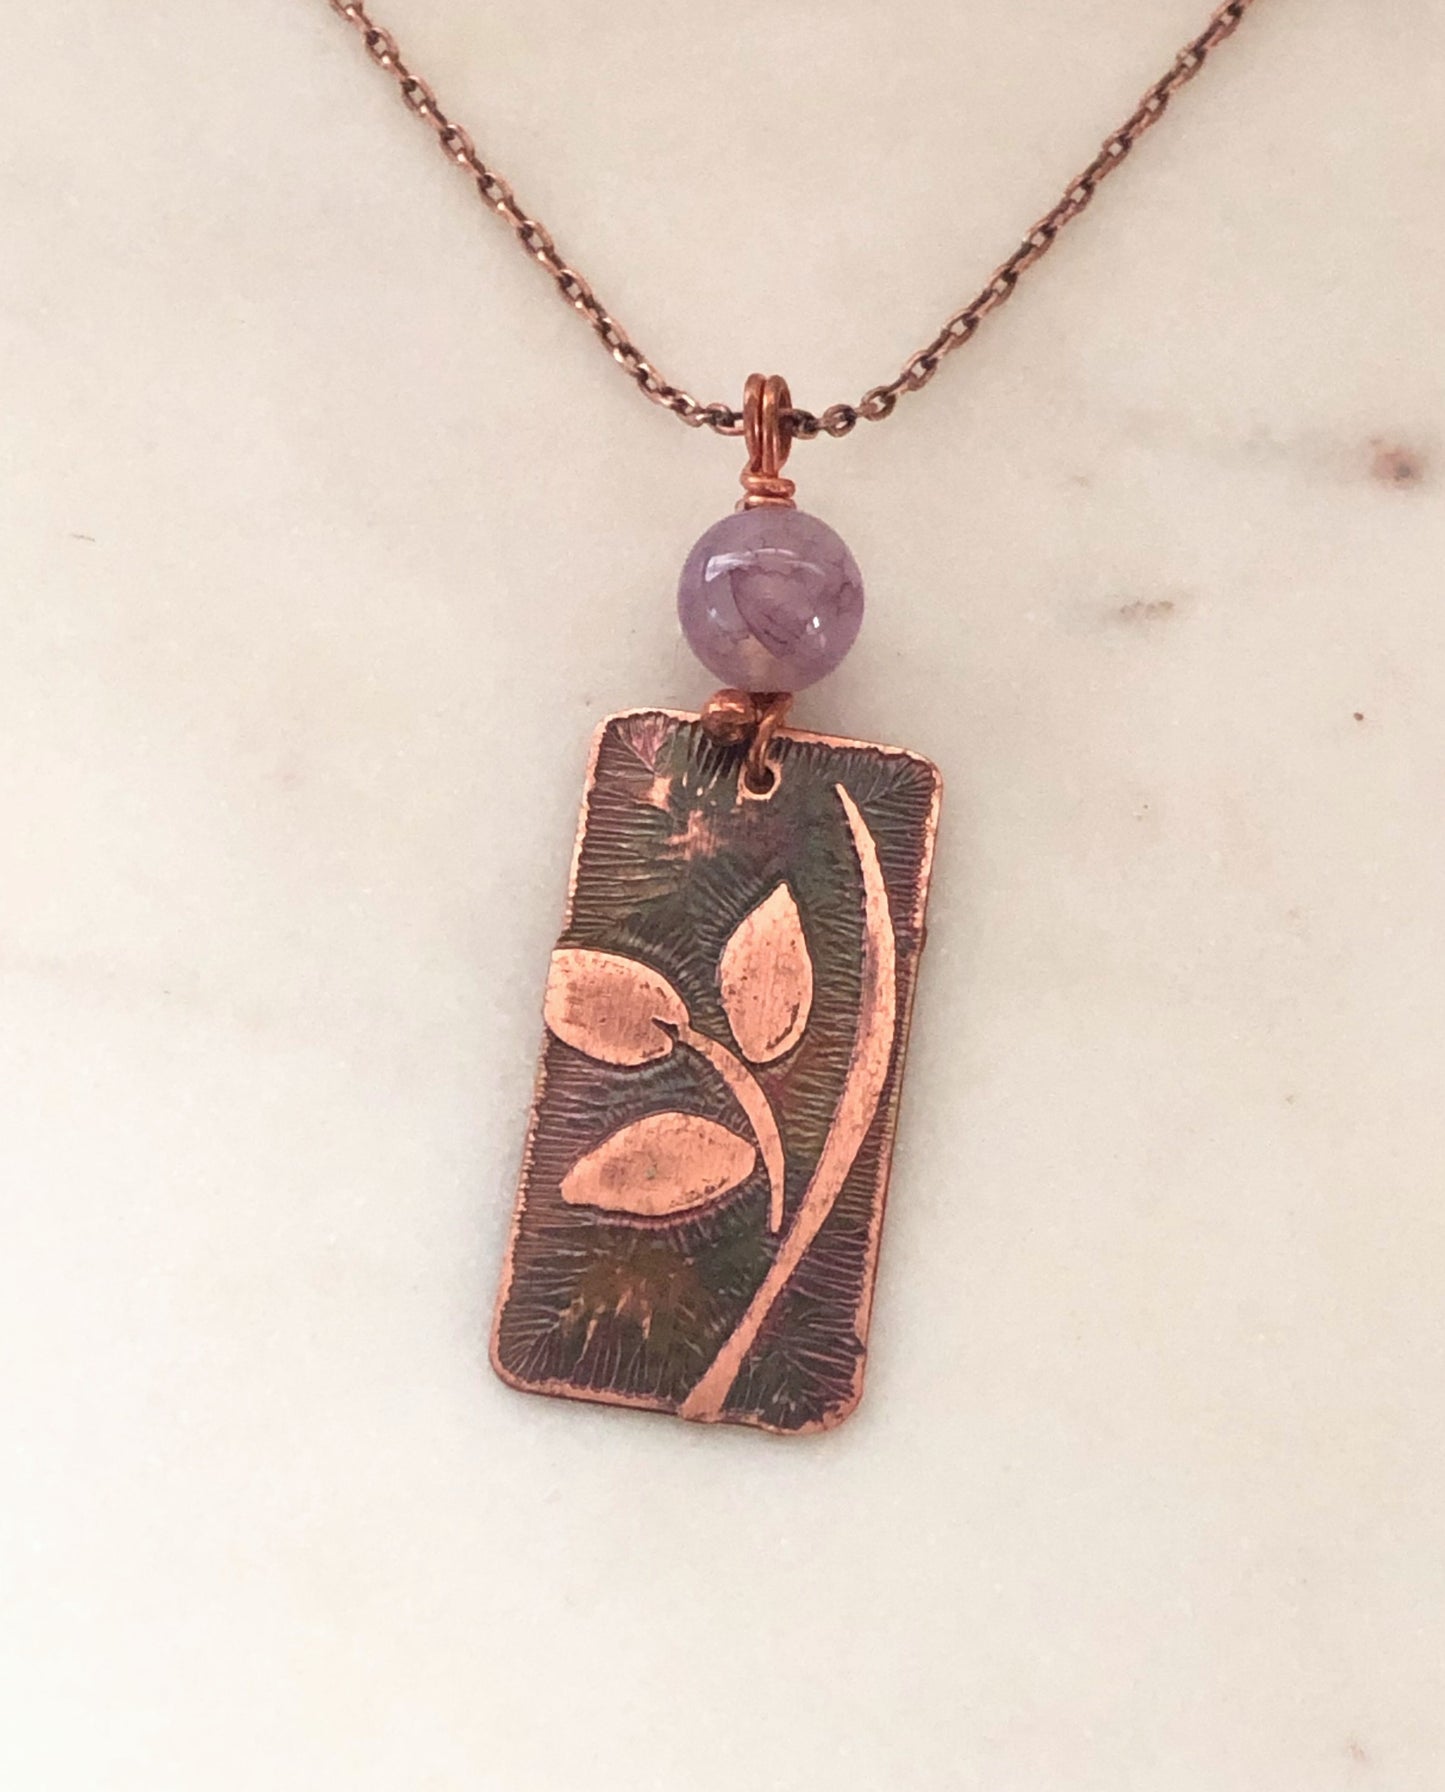 Acid etched copper leaf necklace with agate